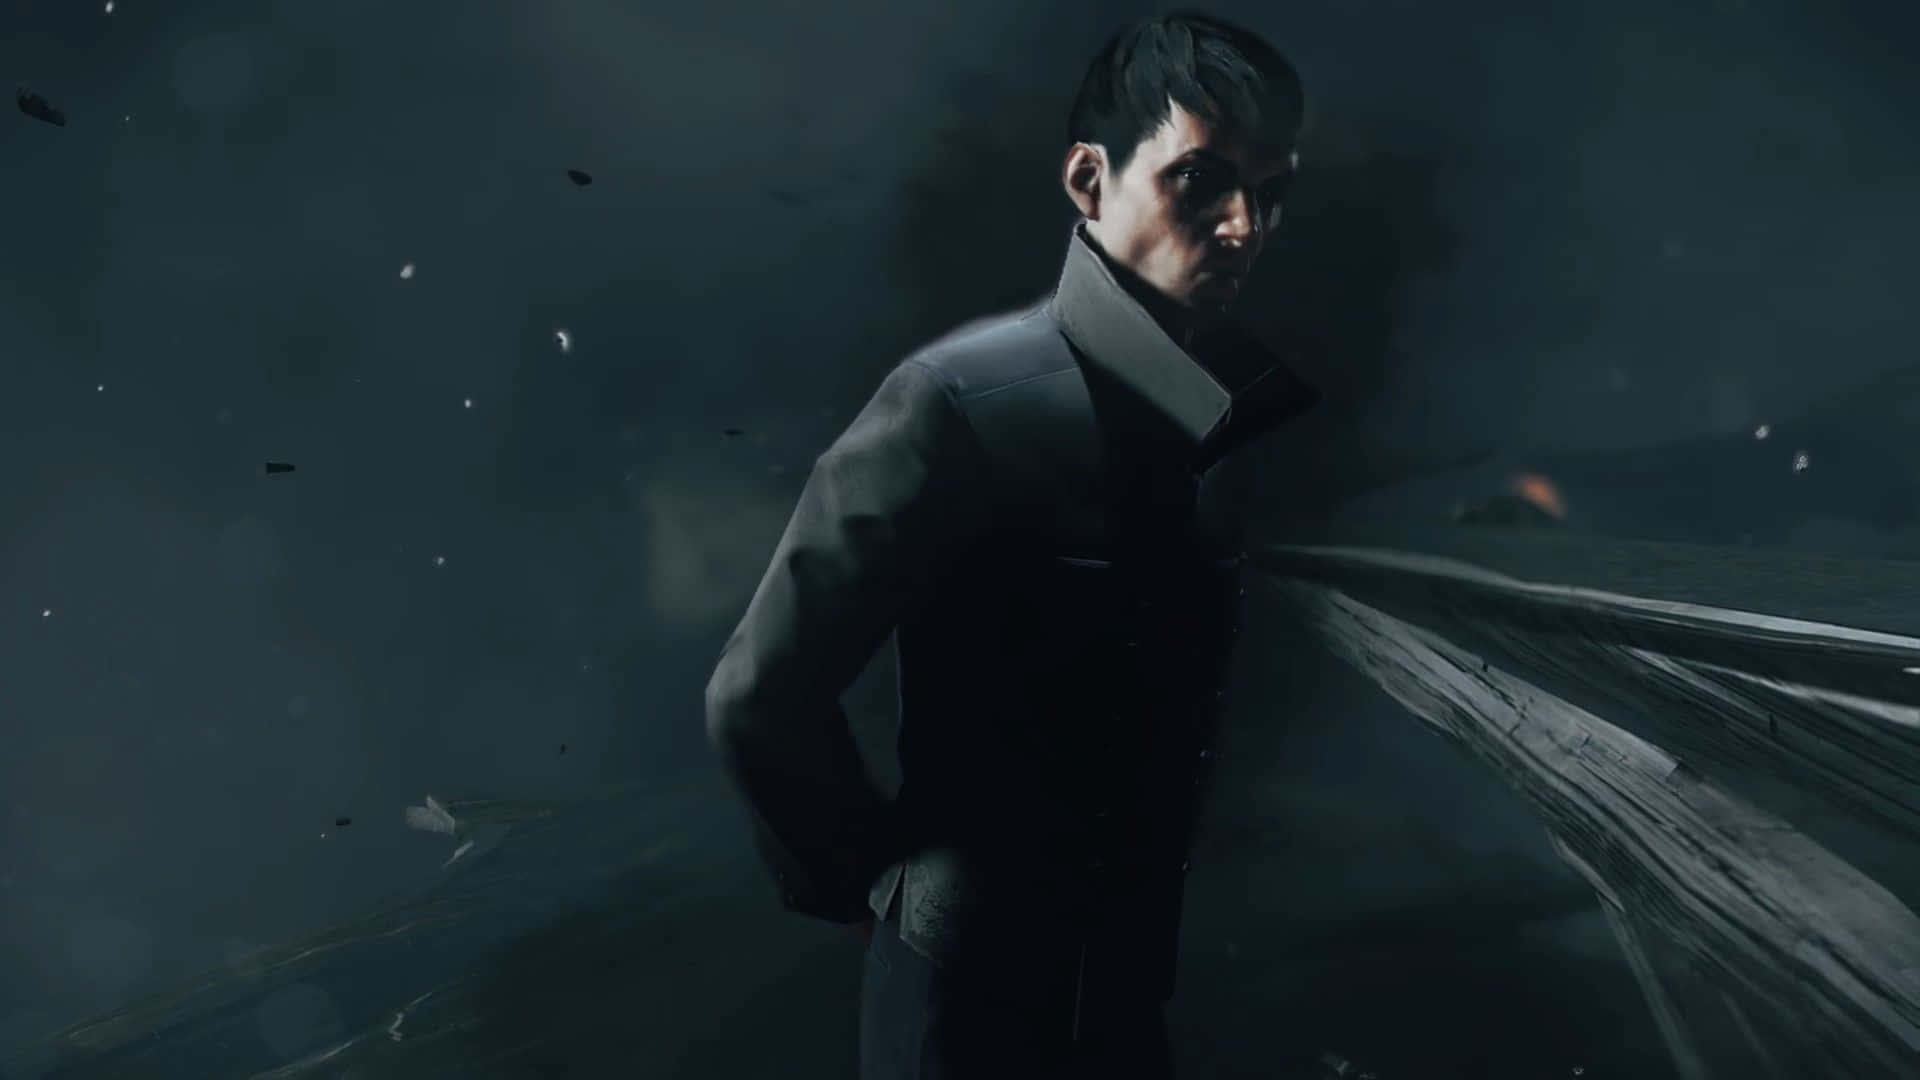 Dishonored 2 Dual Wallpaper by crowdlegend on DeviantArt